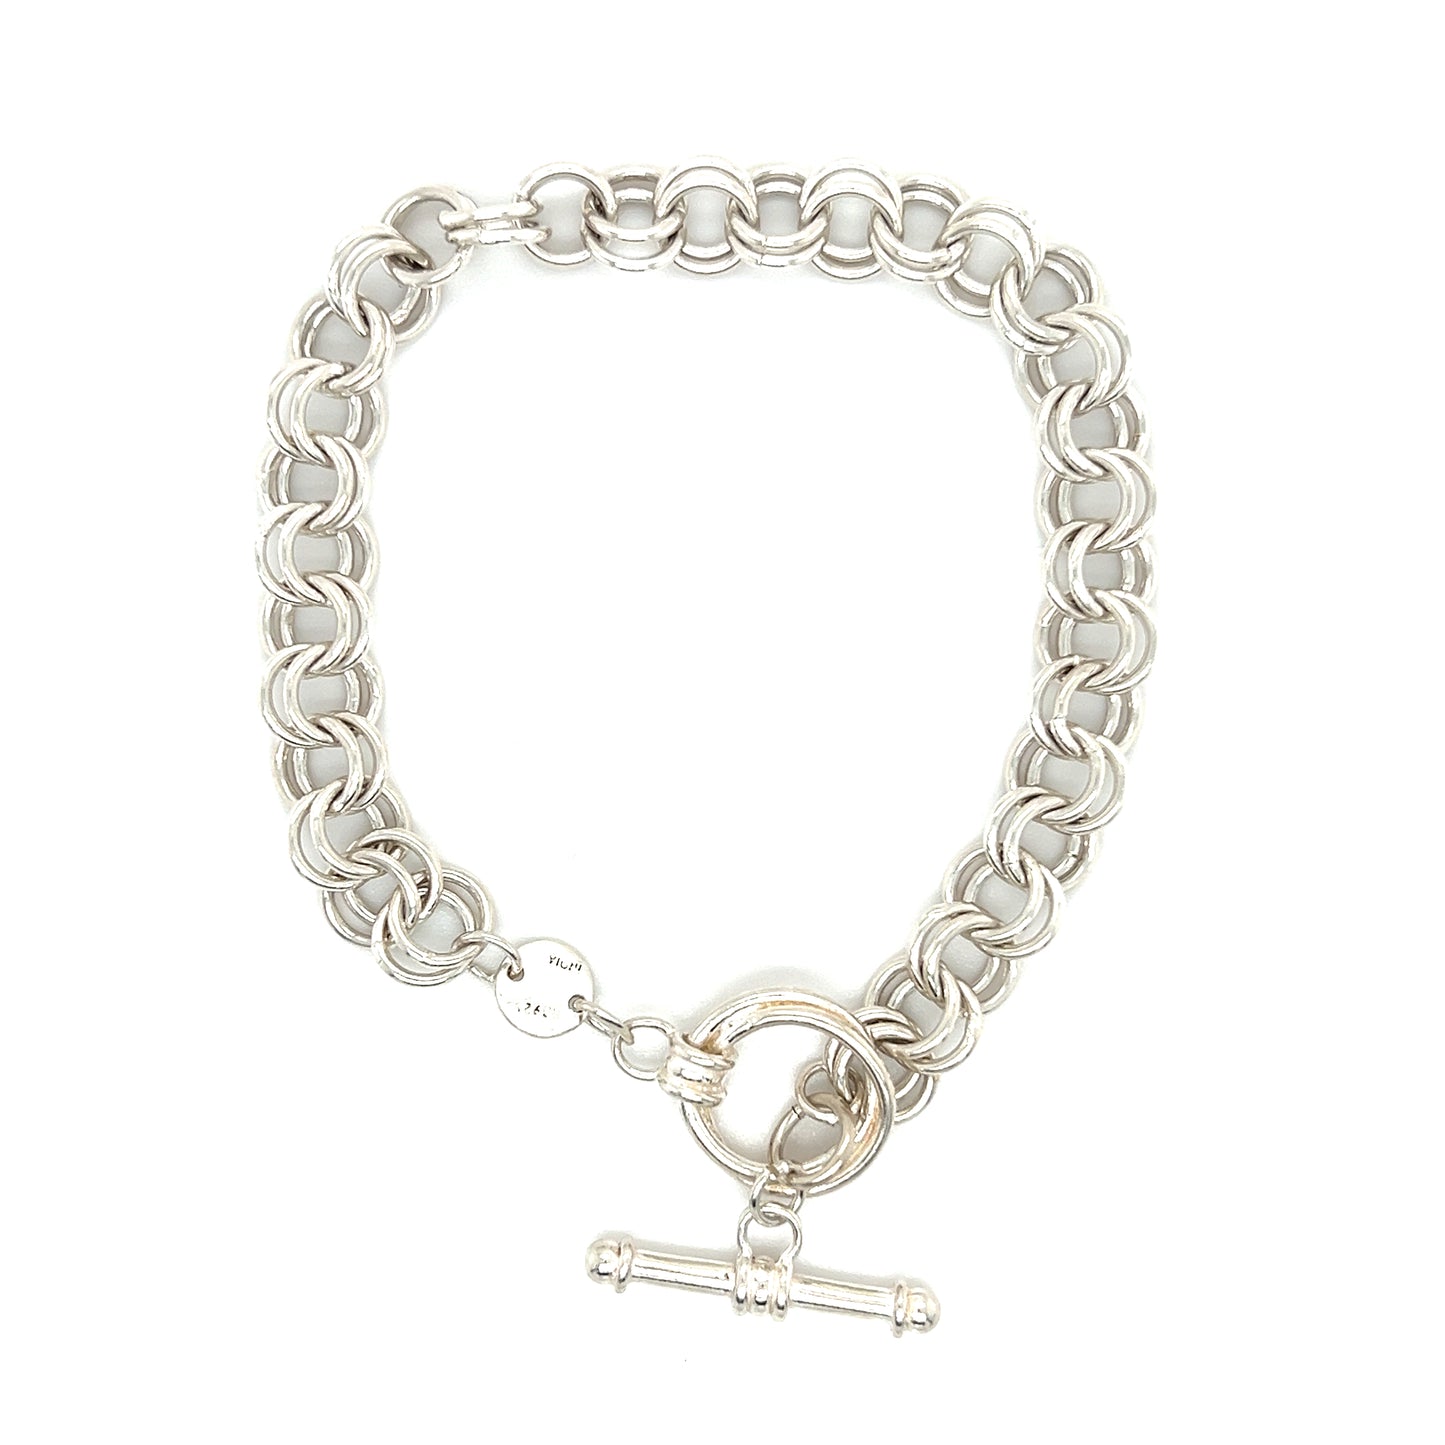 Double Link Chram Bracelet with Toggle Clasp in Sterling Silver Closed Clasp View